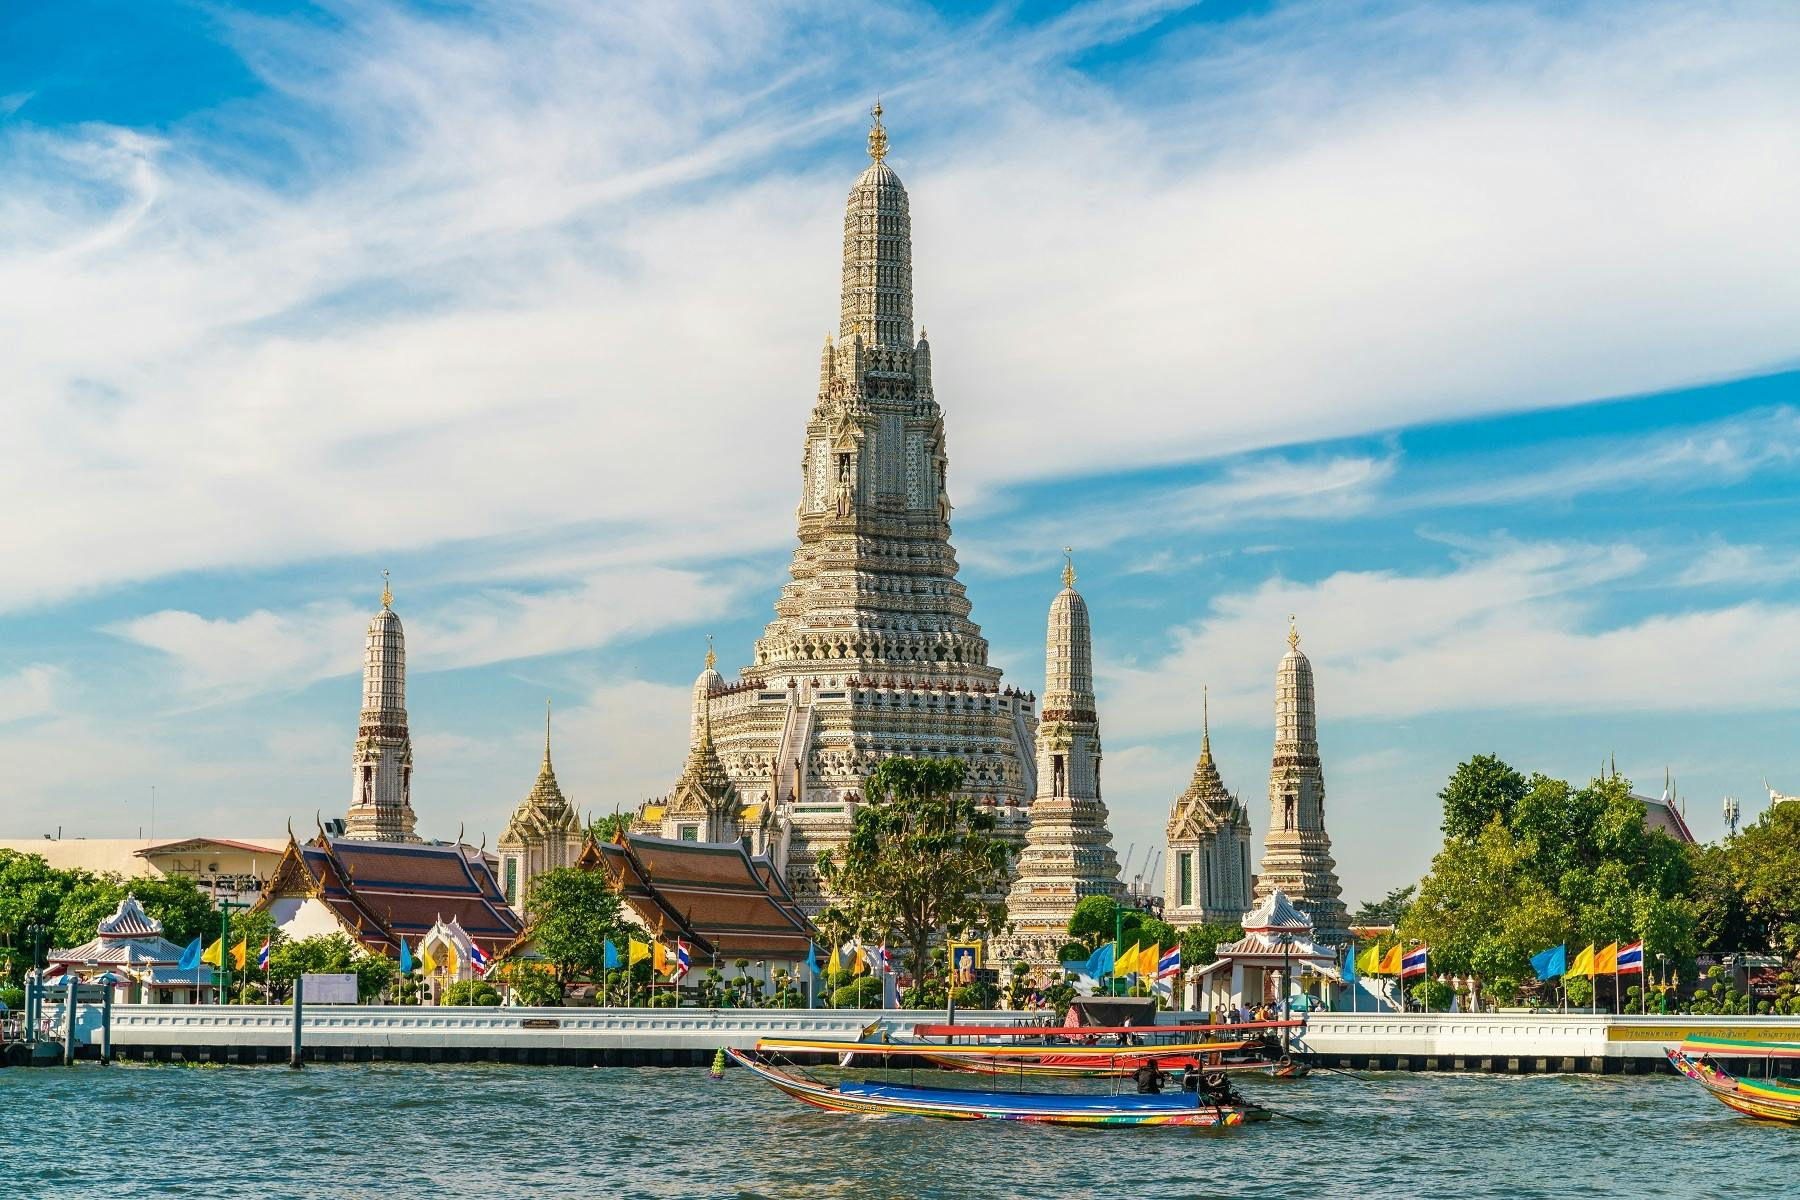 Guided tour of tastes and temples along the Chao Phraya Musement